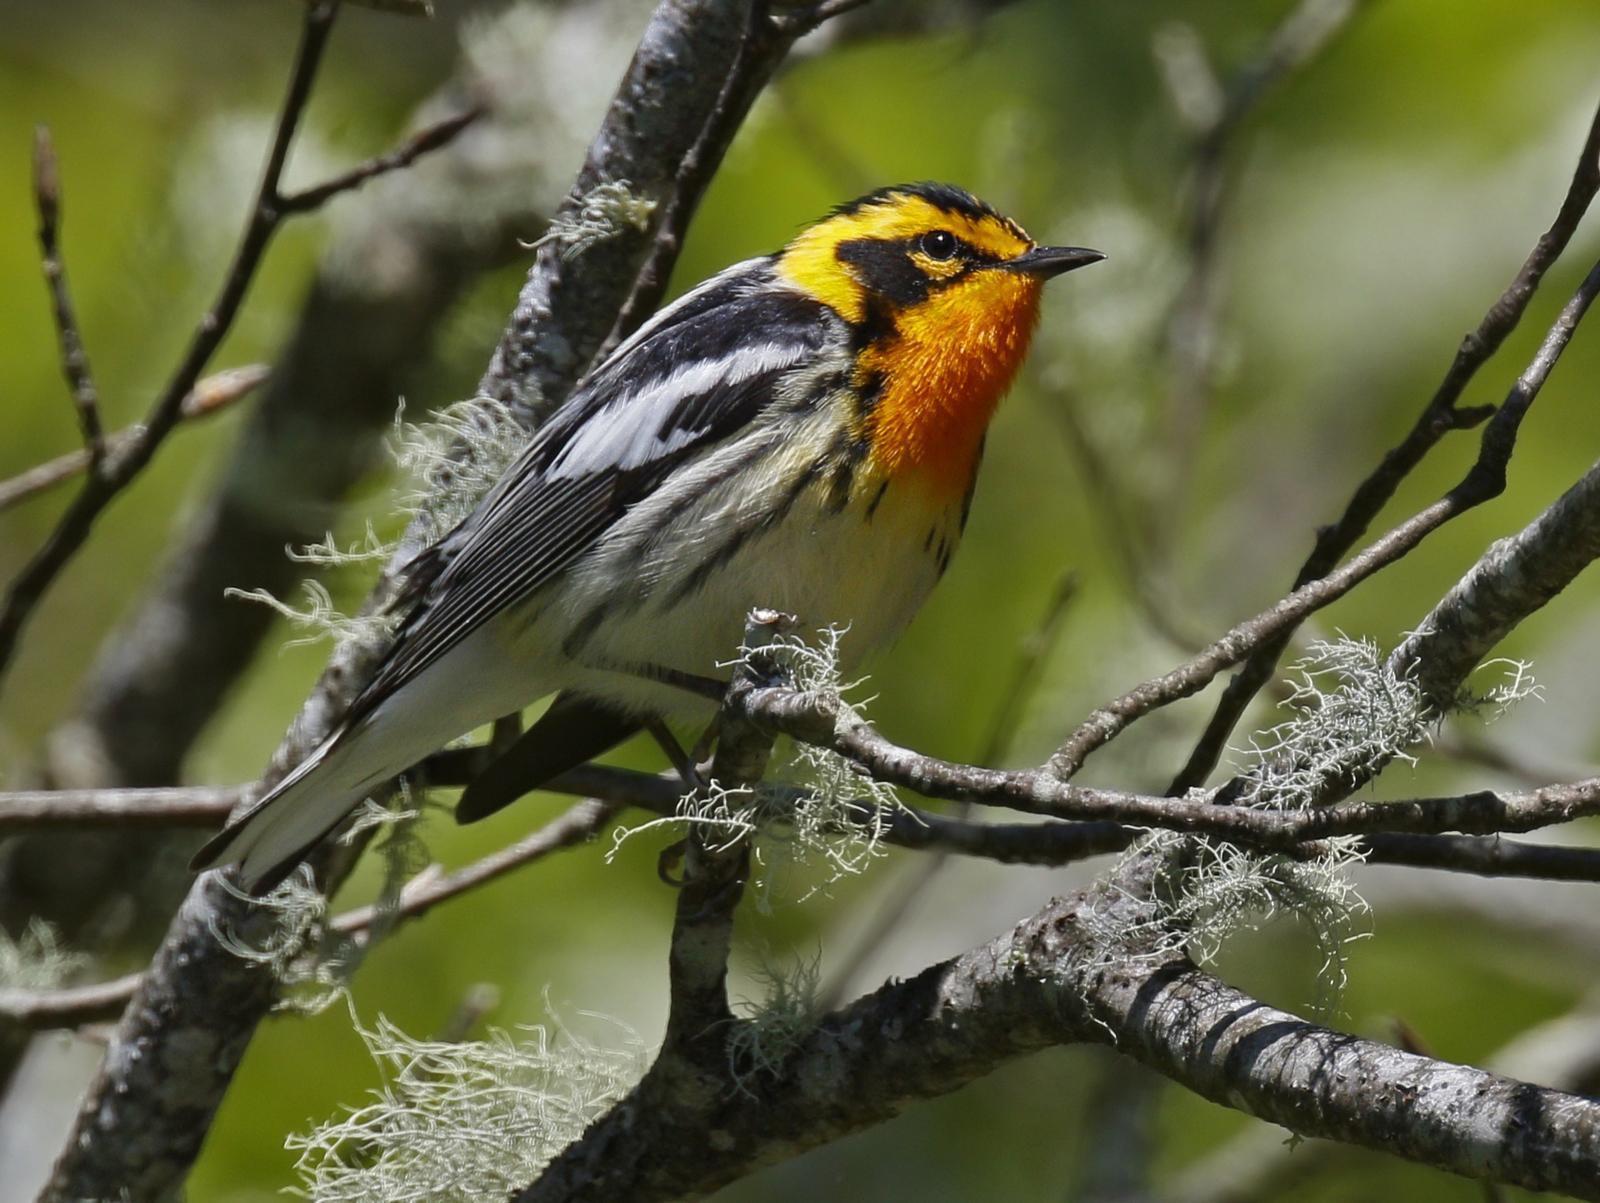 Blackburnian Warbler Photo by Emily Willoughby